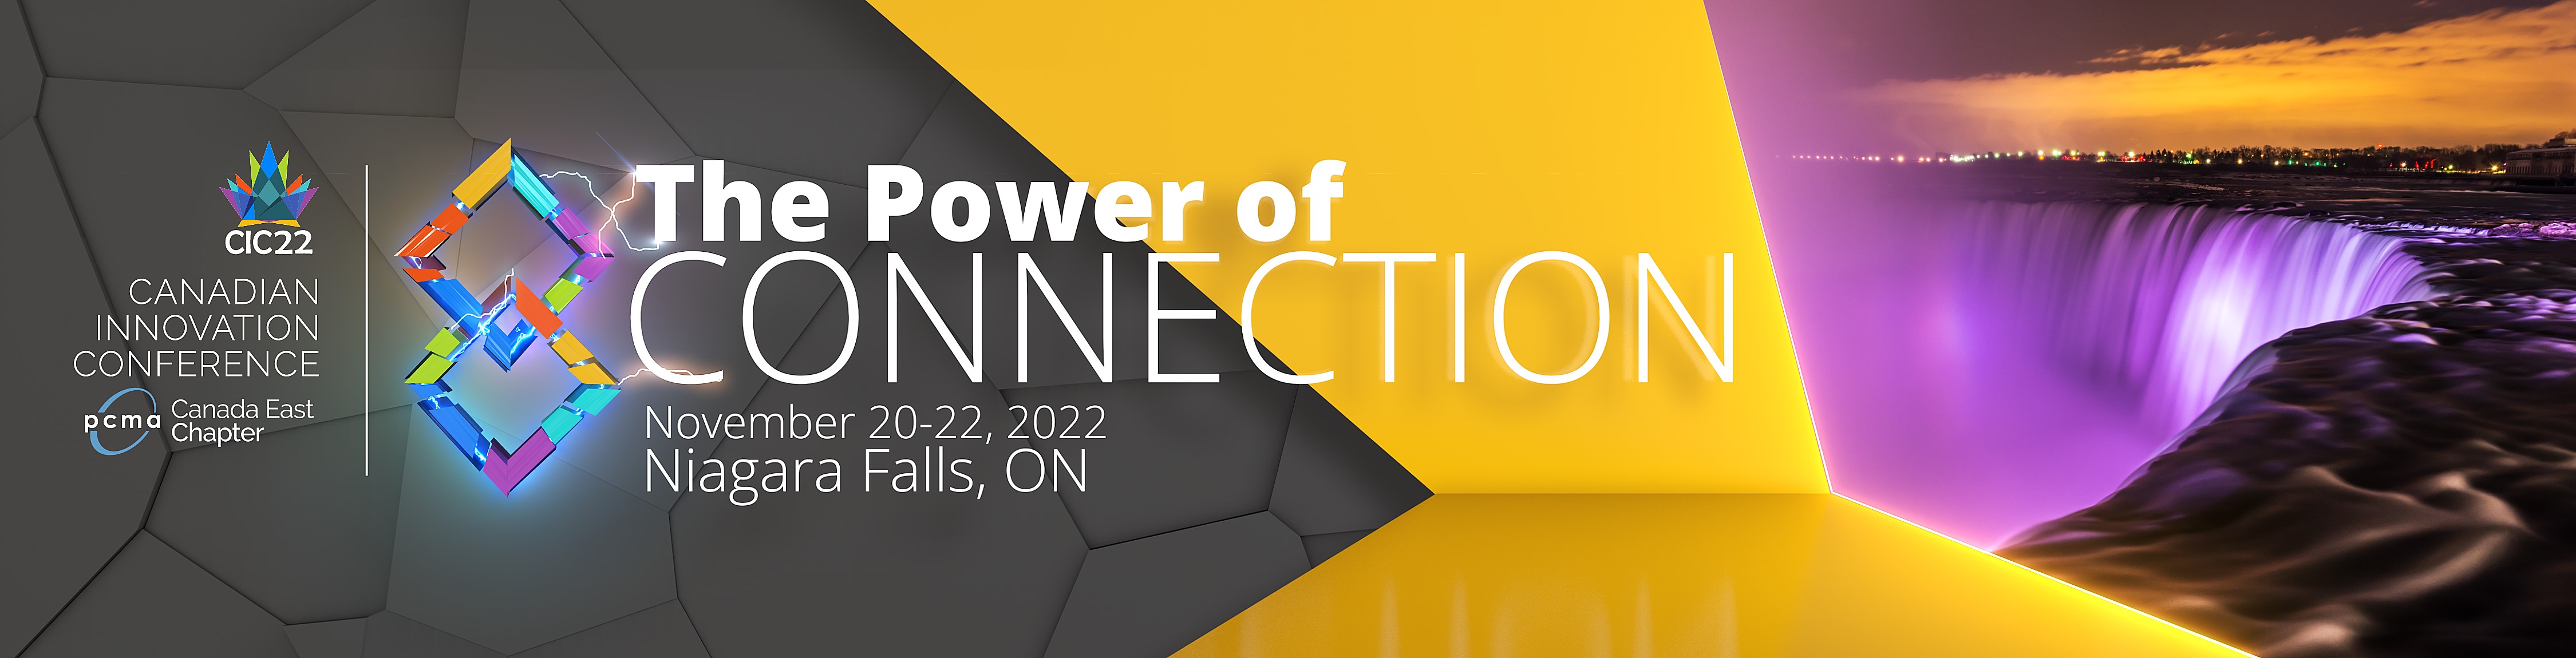 Canadian Innovation Conference 2022